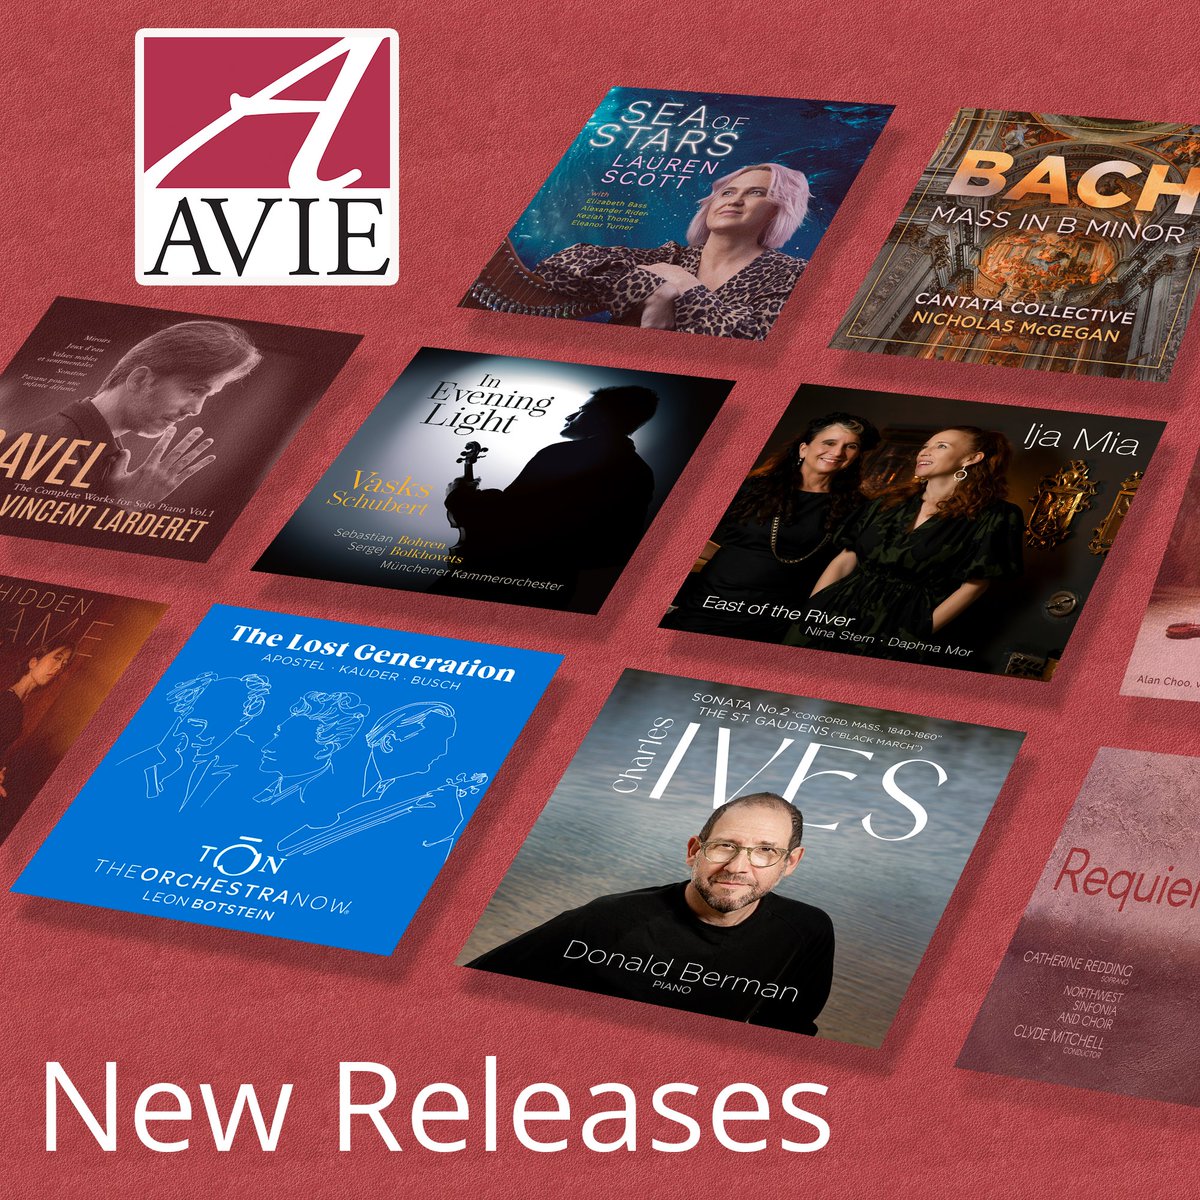 Enjoy selections from recent AVIE releases with the AVIE Presents: New Releases Spotify playlist! Now featuring The Orchestra Now, Donald Berman, Sebastian Bohren, East of the River, and more. Listen here: spoti.fi/3MQaG2u